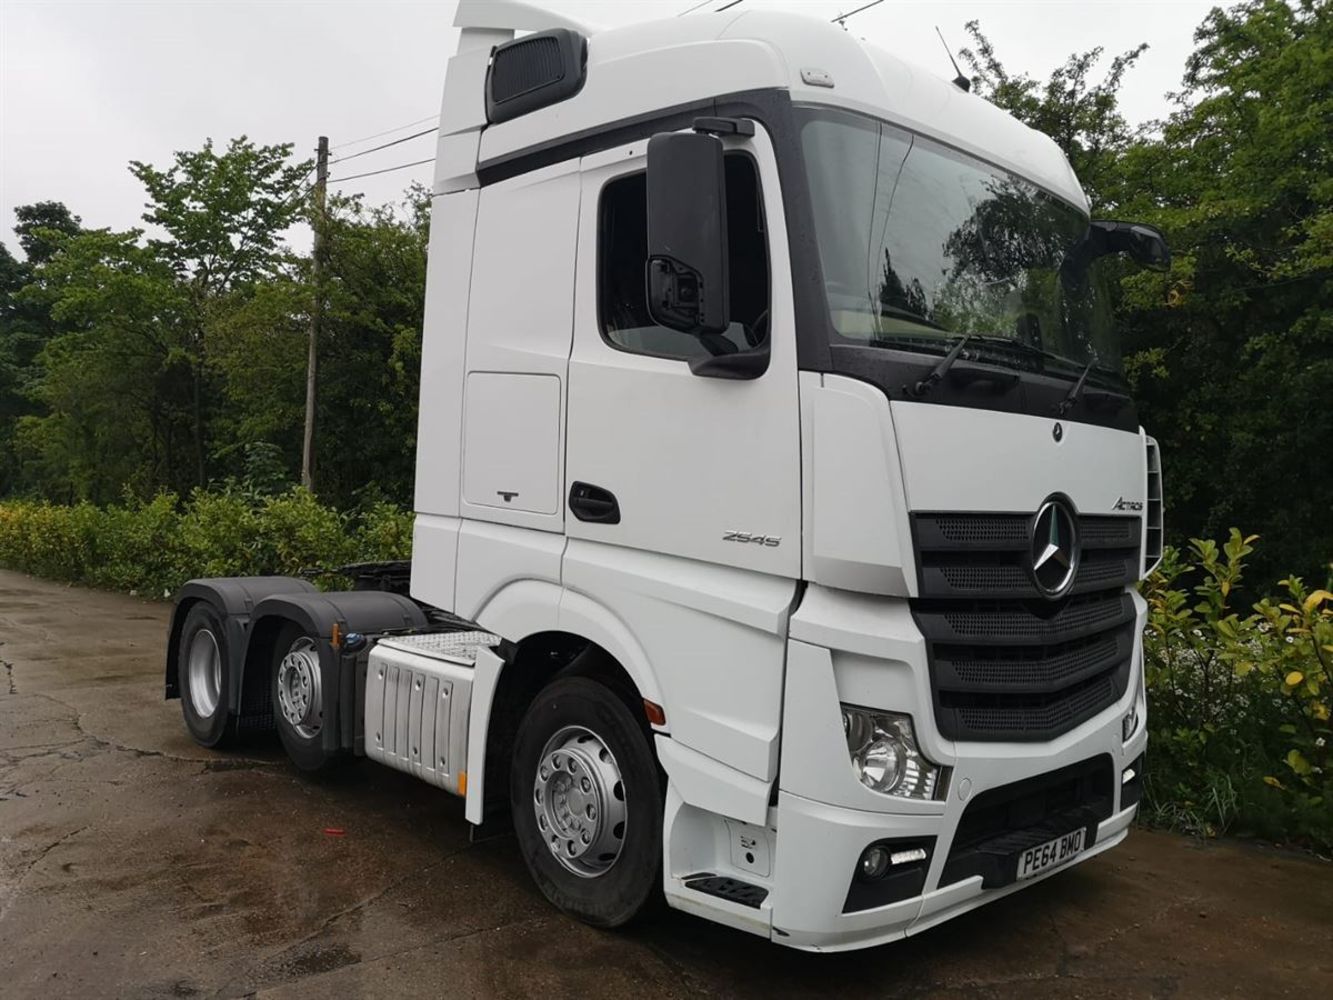 Selection of HGV Tractor Units, Fridge Trailers - Various Makes and Models